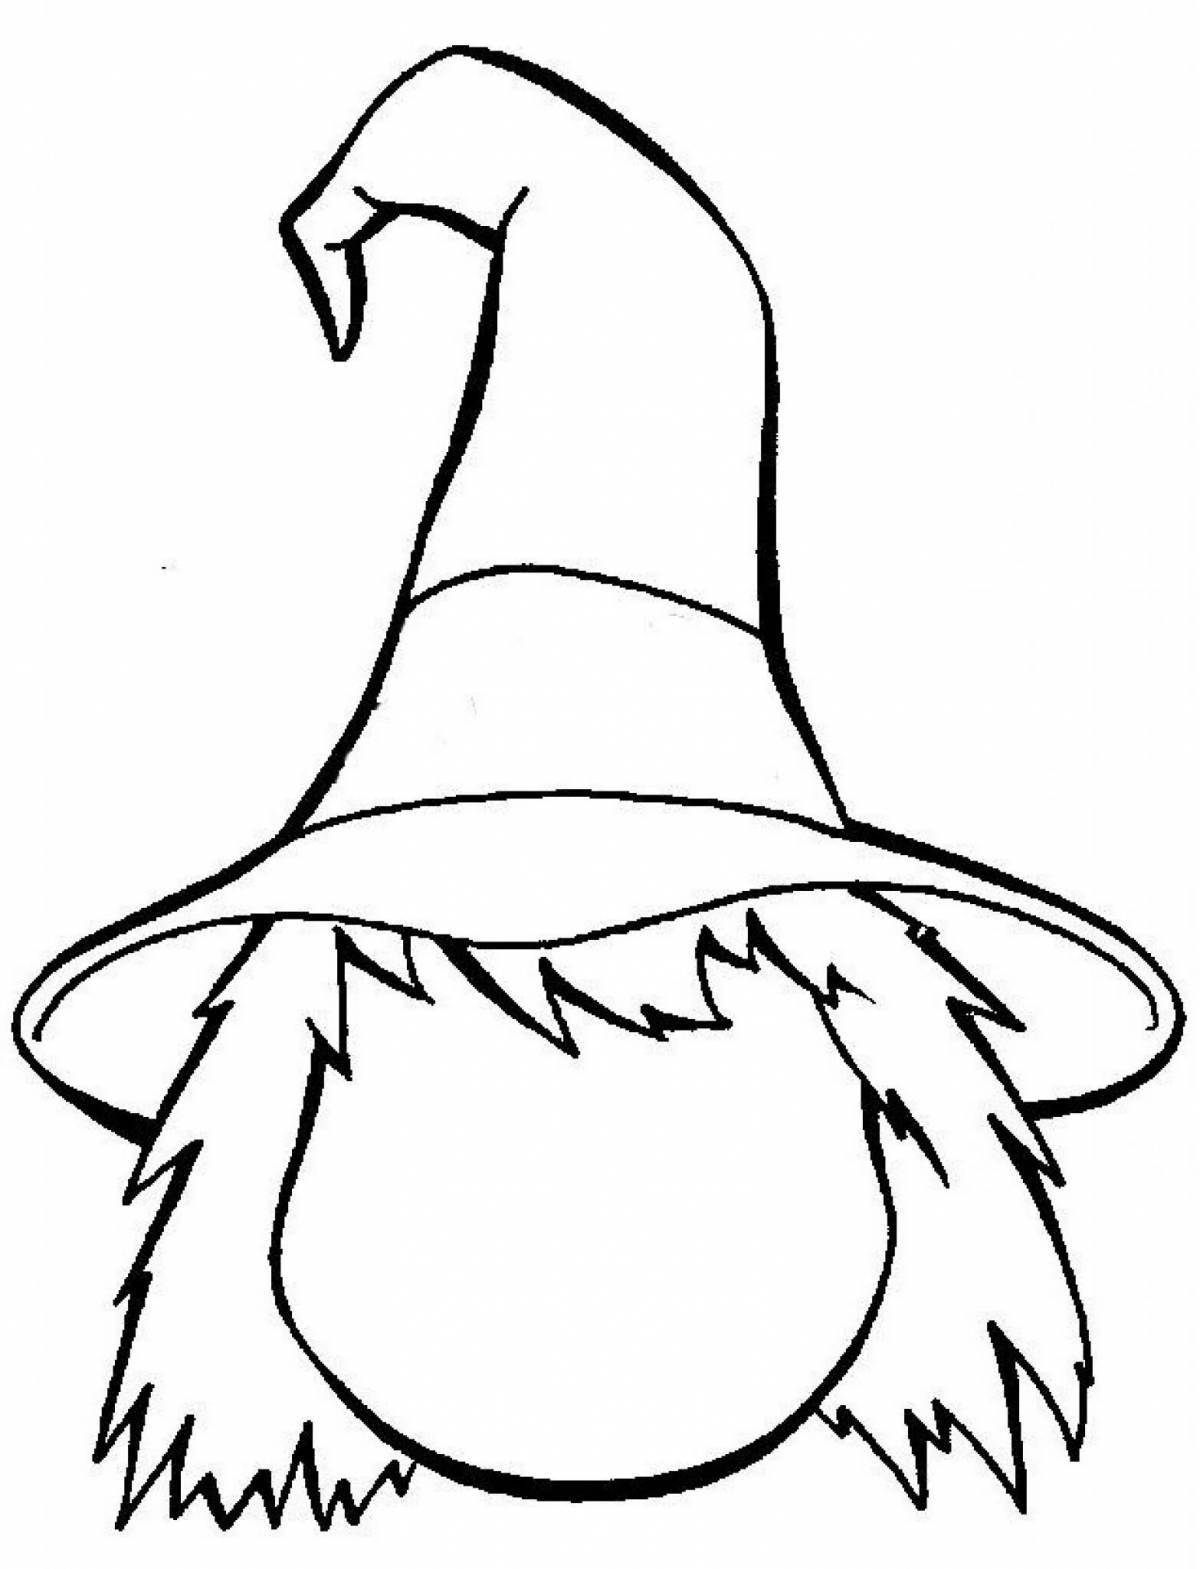 Charming wizard's hat coloring page